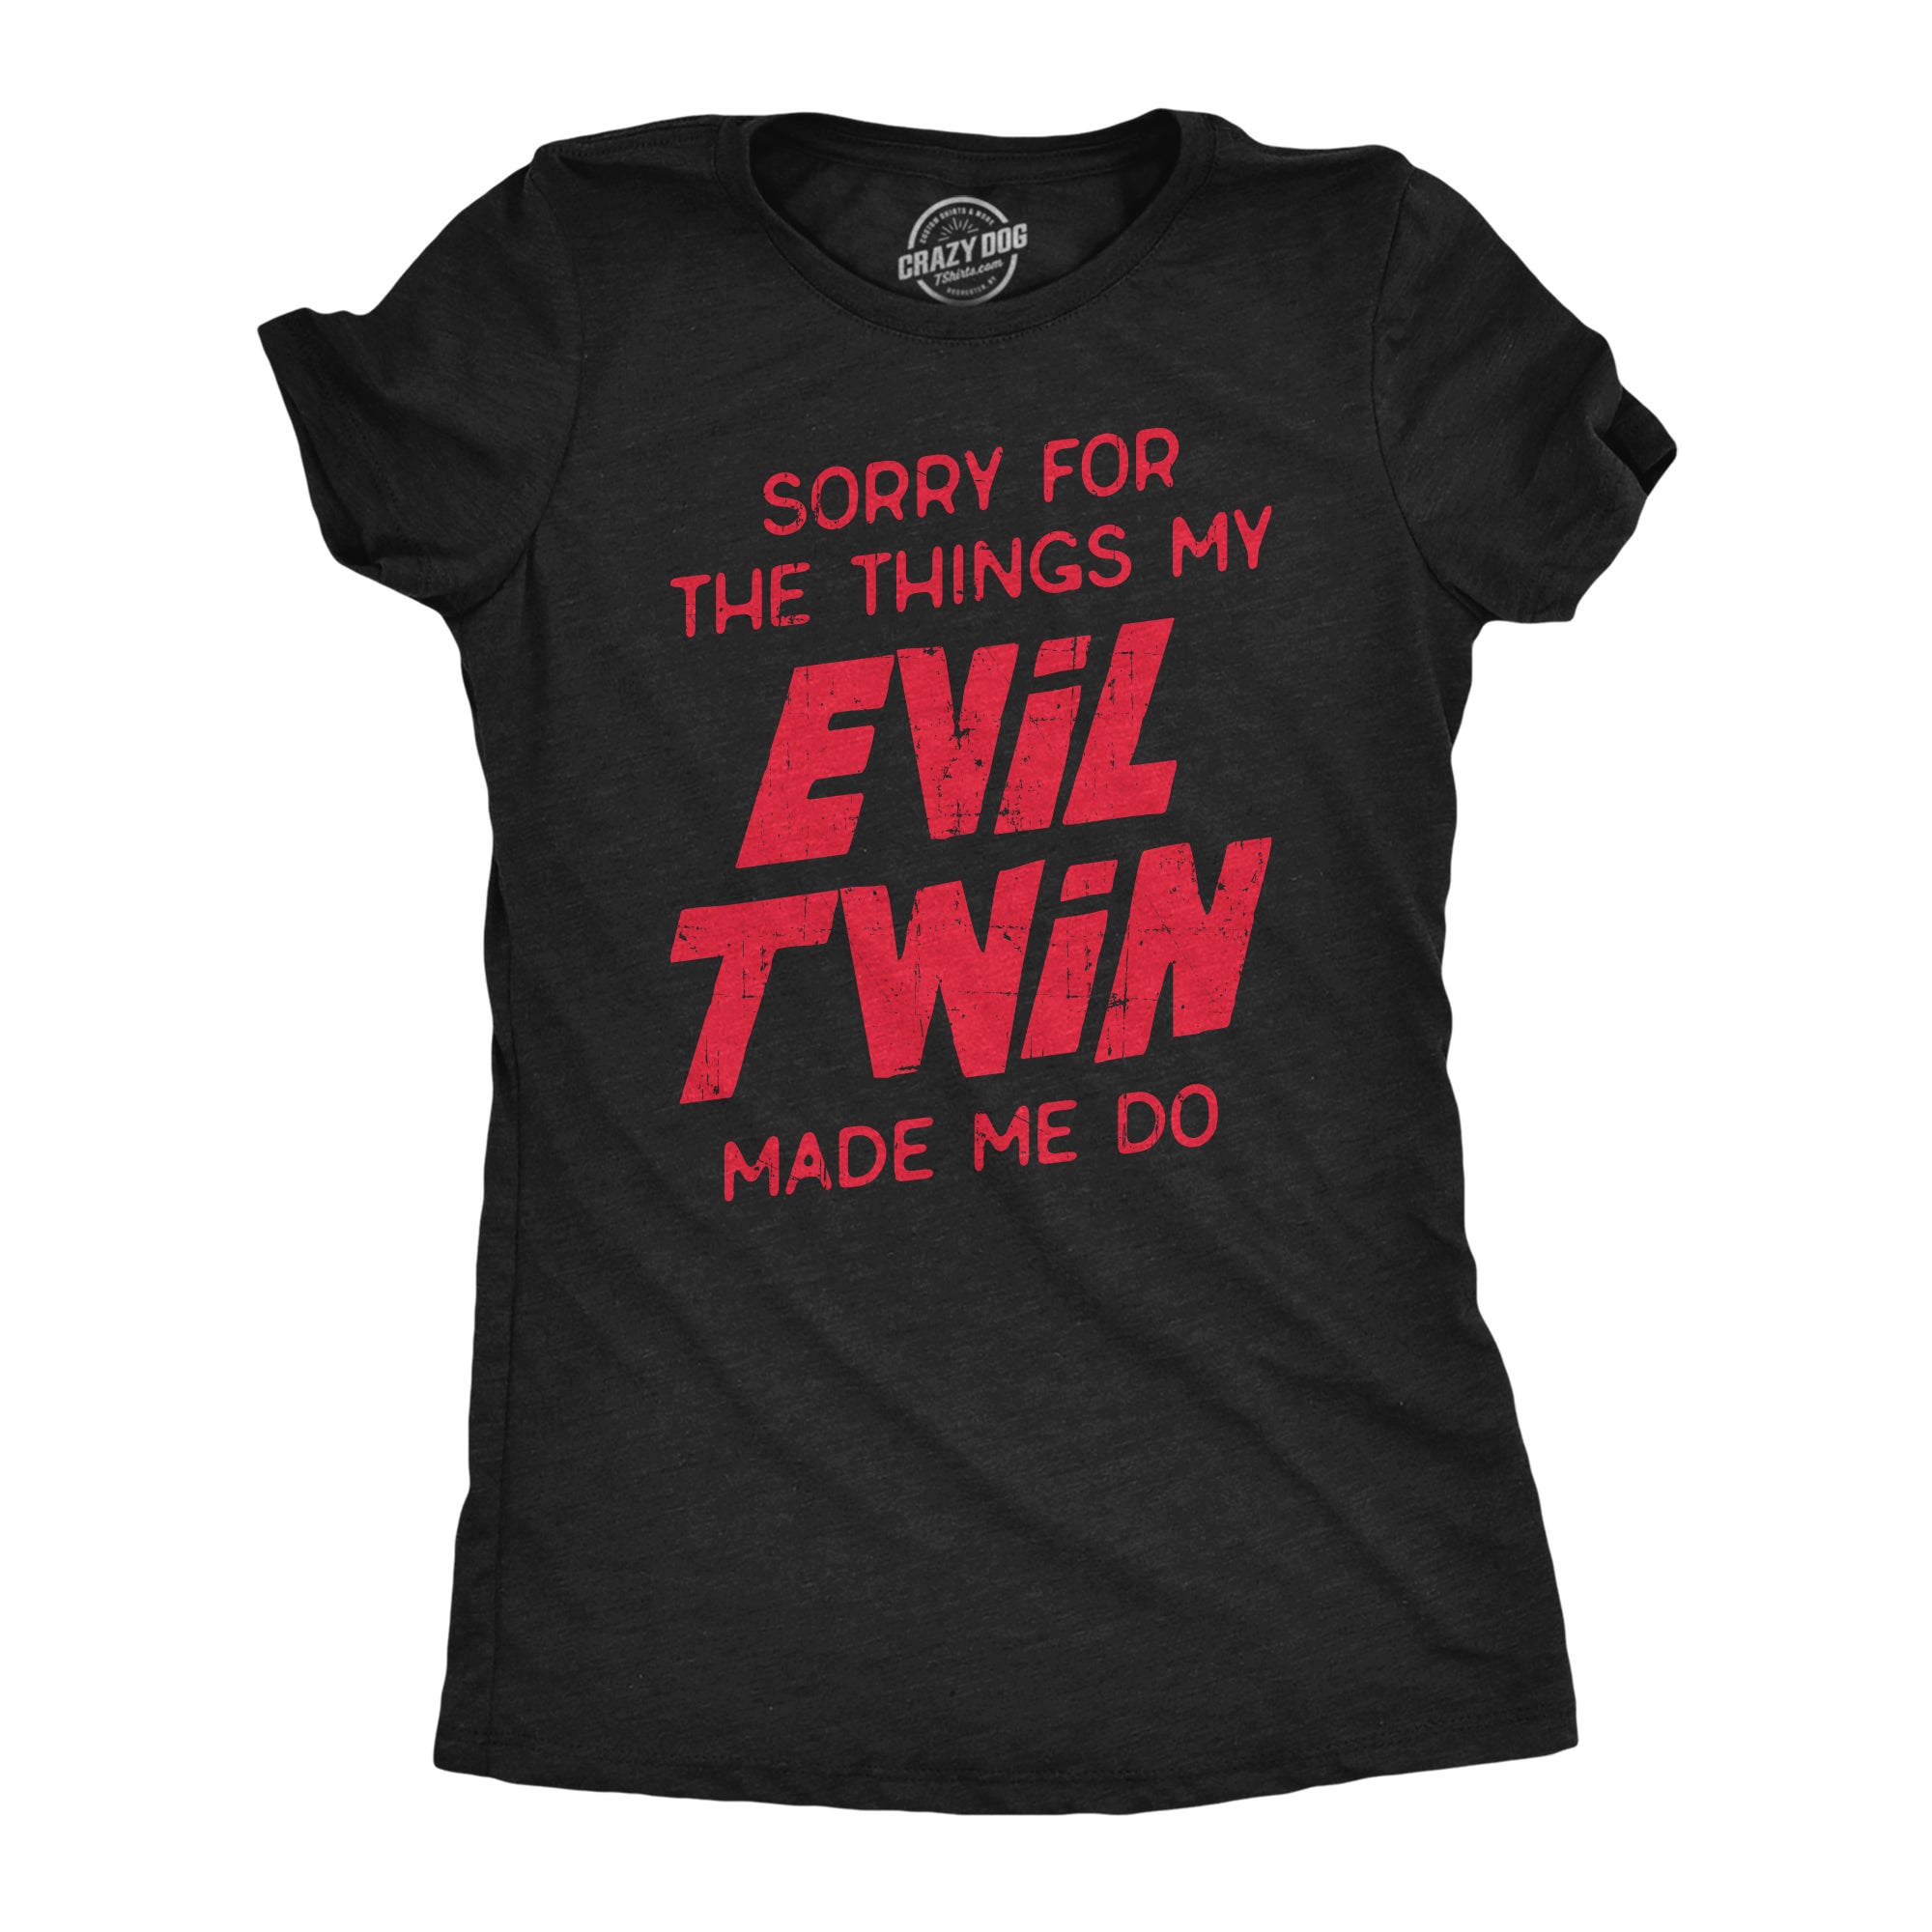 Funny Heather Black Sorry For The Things My Evil Twin Made Me Do Womens T Shirt Nerdy Sarcastic Tee